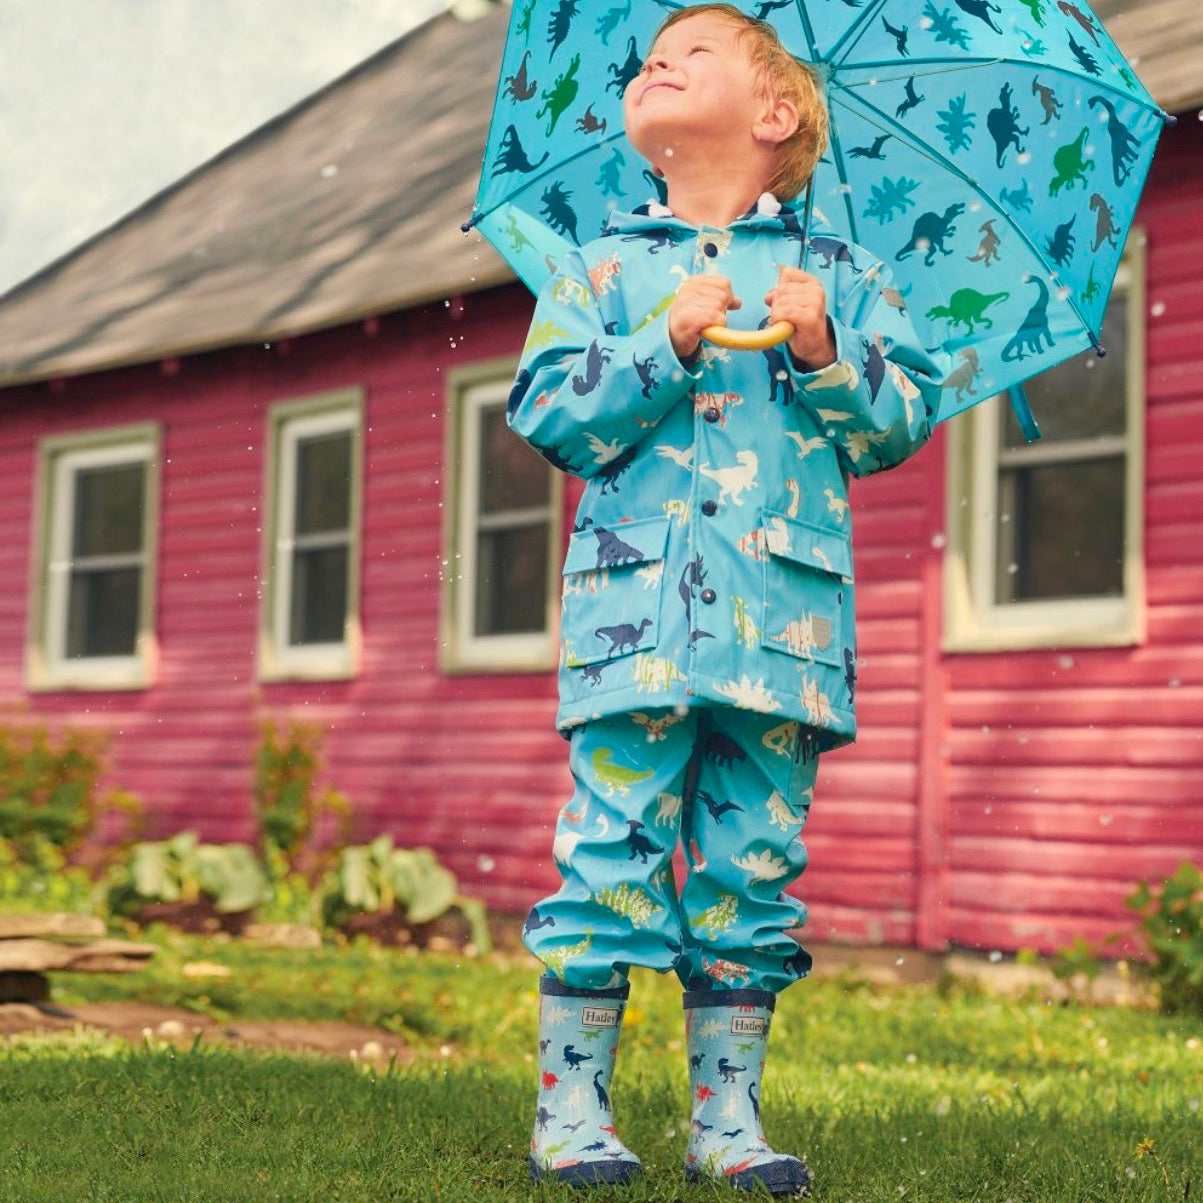 Hatley Prehistoric Dinos Colour Changing Raincoat S22sdk1 Clothing 1YRS / Blue,2YRS / Blue,3YRS / Blue,4YRS / Blue,5YRS / Blue,6YRS / Blue,7YRS / Blue,8YRS / Blue,10YRS / Blue,12YRS / Blue